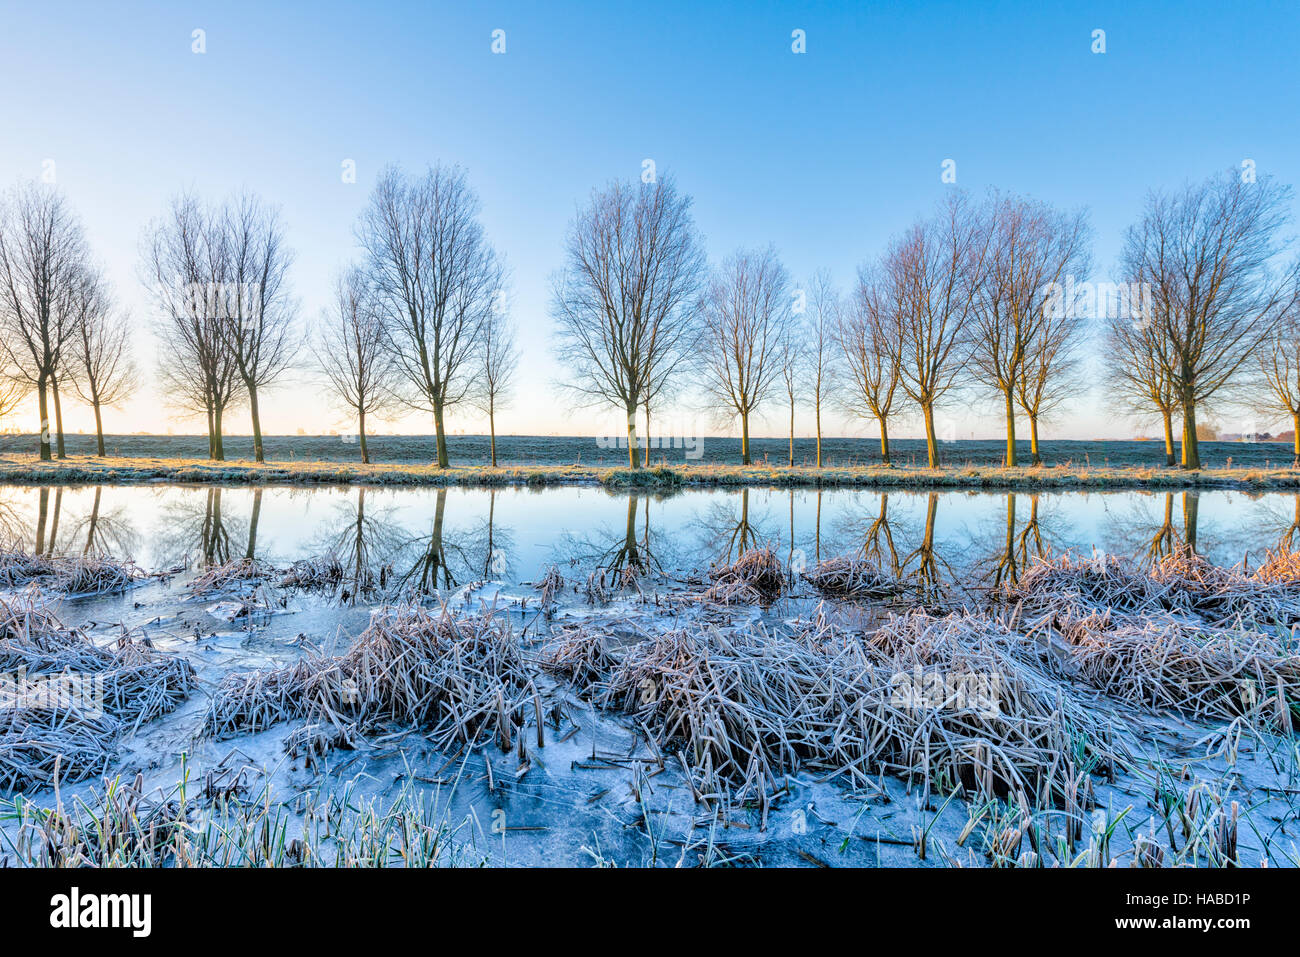 Willingham, Cambridgeshire, UK. 29th November 2016. A line willow trees grown to make cricket bats are reflected at dawn on the Old West River in the flat landscape of the Cambridgeshire Fens where temperatures fell overnight to minus 4 degrees centigrade on one of the coldest nights of the winter so far this year. Further freezing conditions are forecast for the next few days. Credit Julian Eales/Alamy Live News Stock Photo